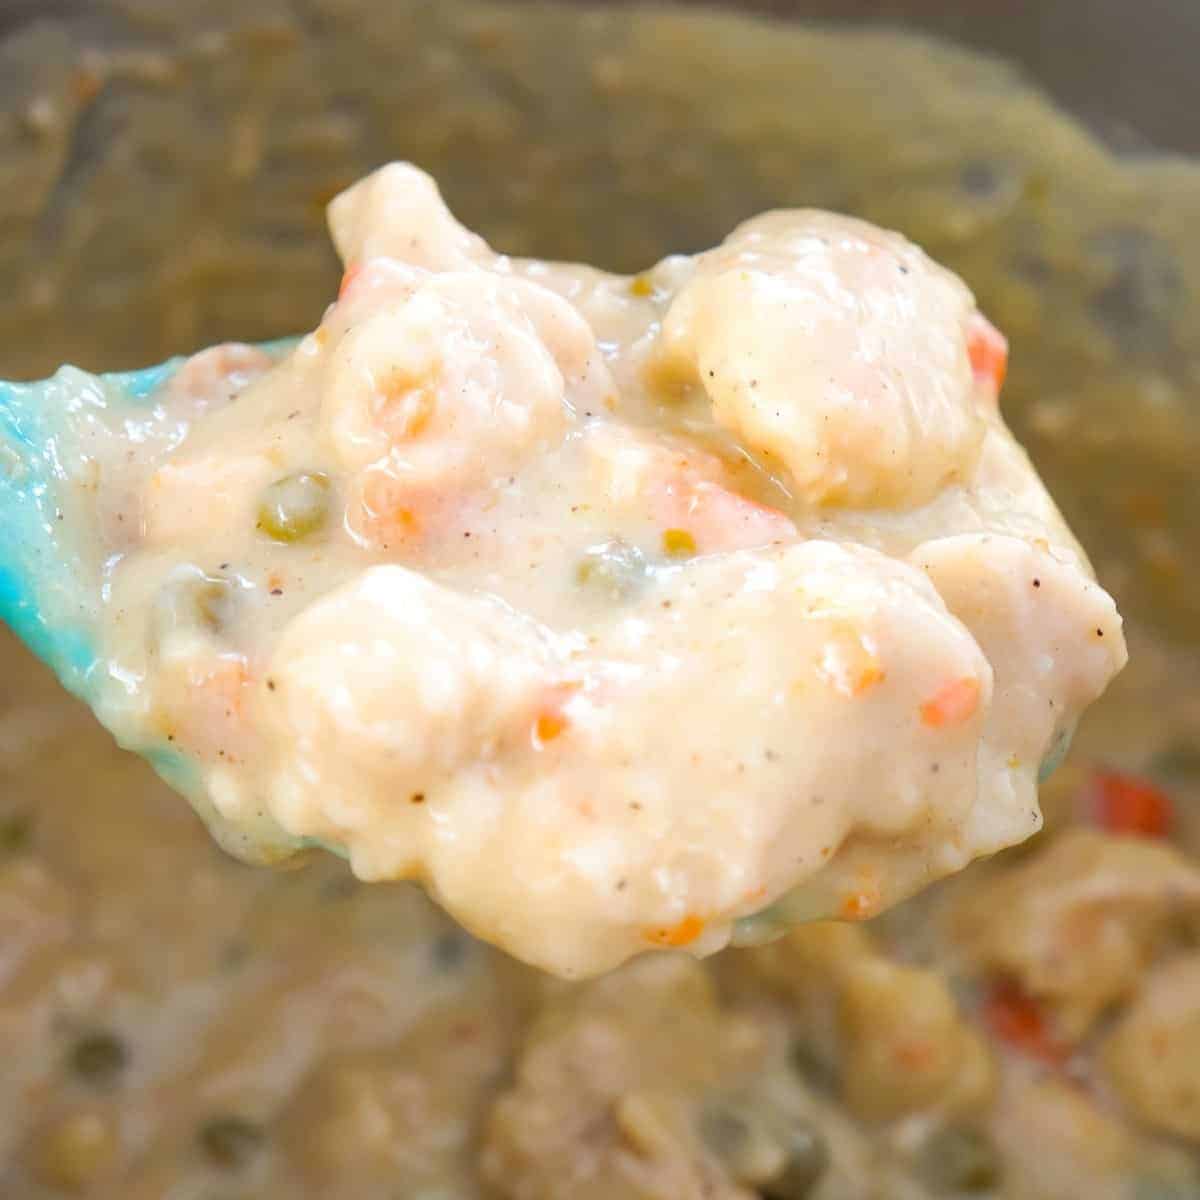 Instant Pot Chicken and Dumplings with Biscuits is an easy dump and start recipe using boneless, skinless chicken breasts, cream of chicken soup, Pillsbury refrigerated biscuits and canned peas and carrots.